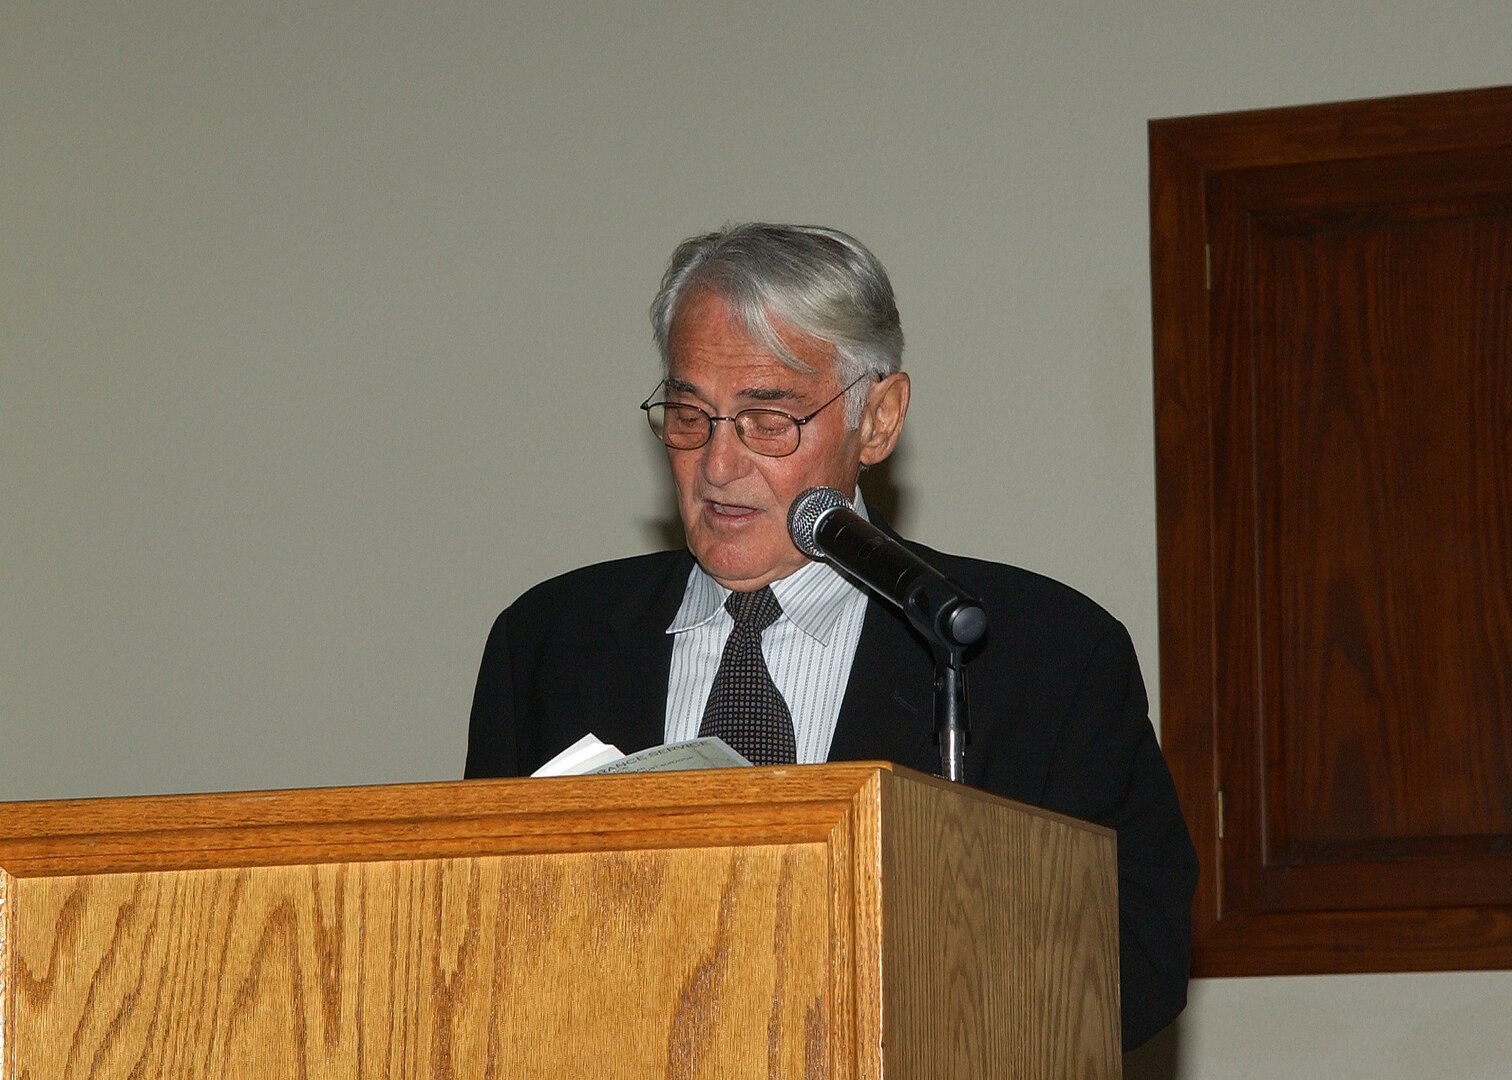 William Samelson, a visiting professor of Holocaust and Genocide Studies at the University of Texas in San Antonio and Trinity University, reads a poem during a Holocaust Remembrance Service April 15 at Lackland Air Force Base, Texas. The poem honors his mother who died during the Holocaust. Dr. Samelson was 11 years old when he was captured by the Nazis and taken to Buchenwald Concentration Camp. He spent three-and-a-half years there. About 57 members of his family perished in concentration camps. (USAF photo by Alan Boedeker)                               